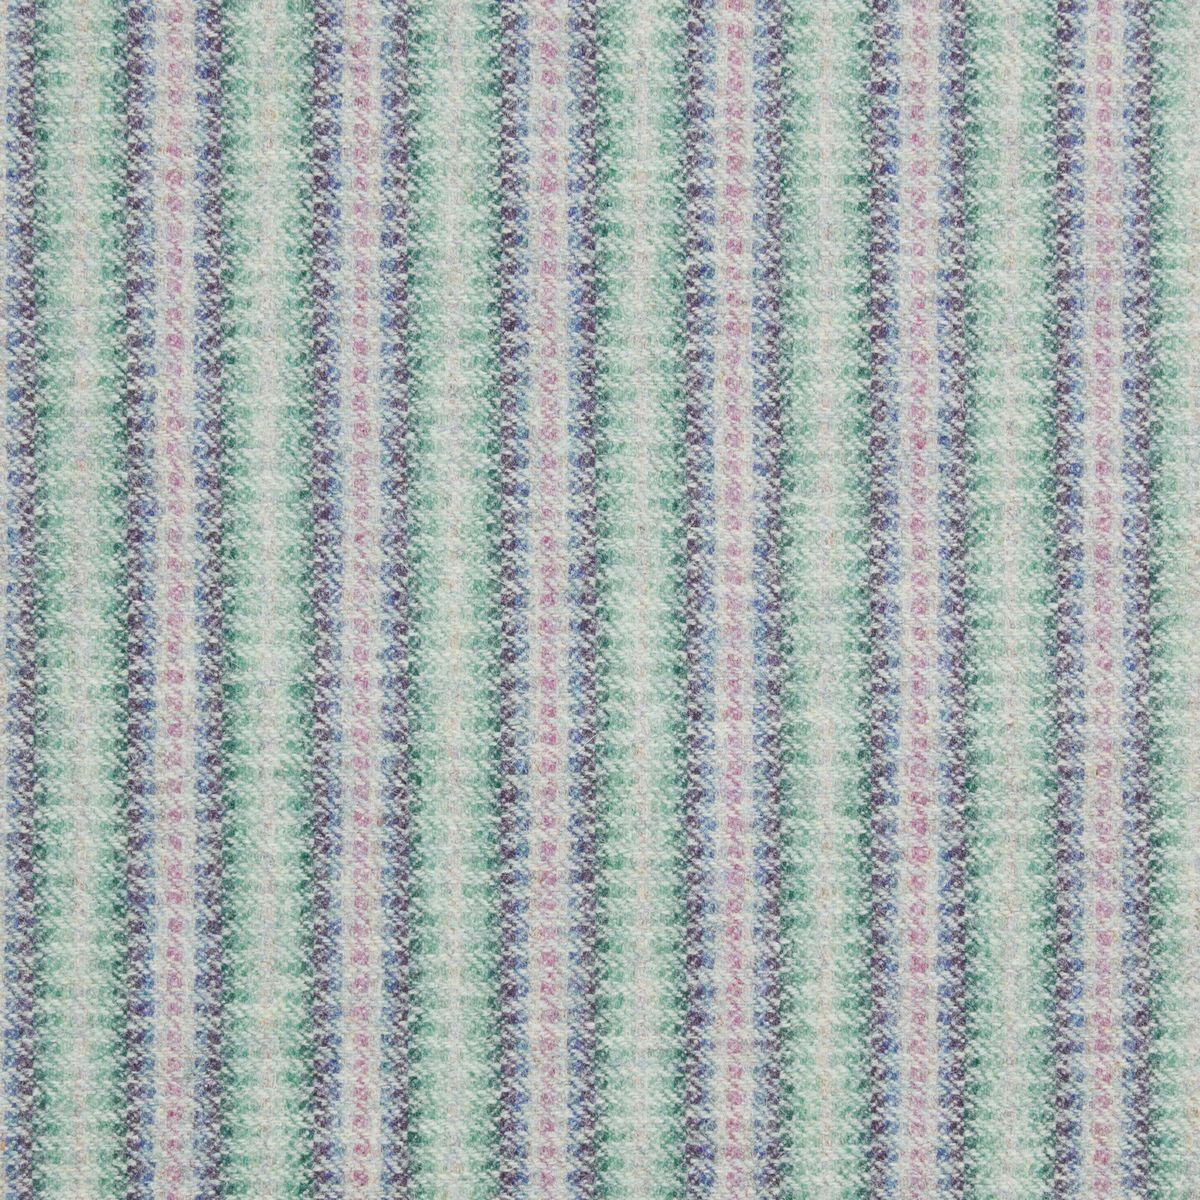 Tobago Heather Fabric by Abraham Moon